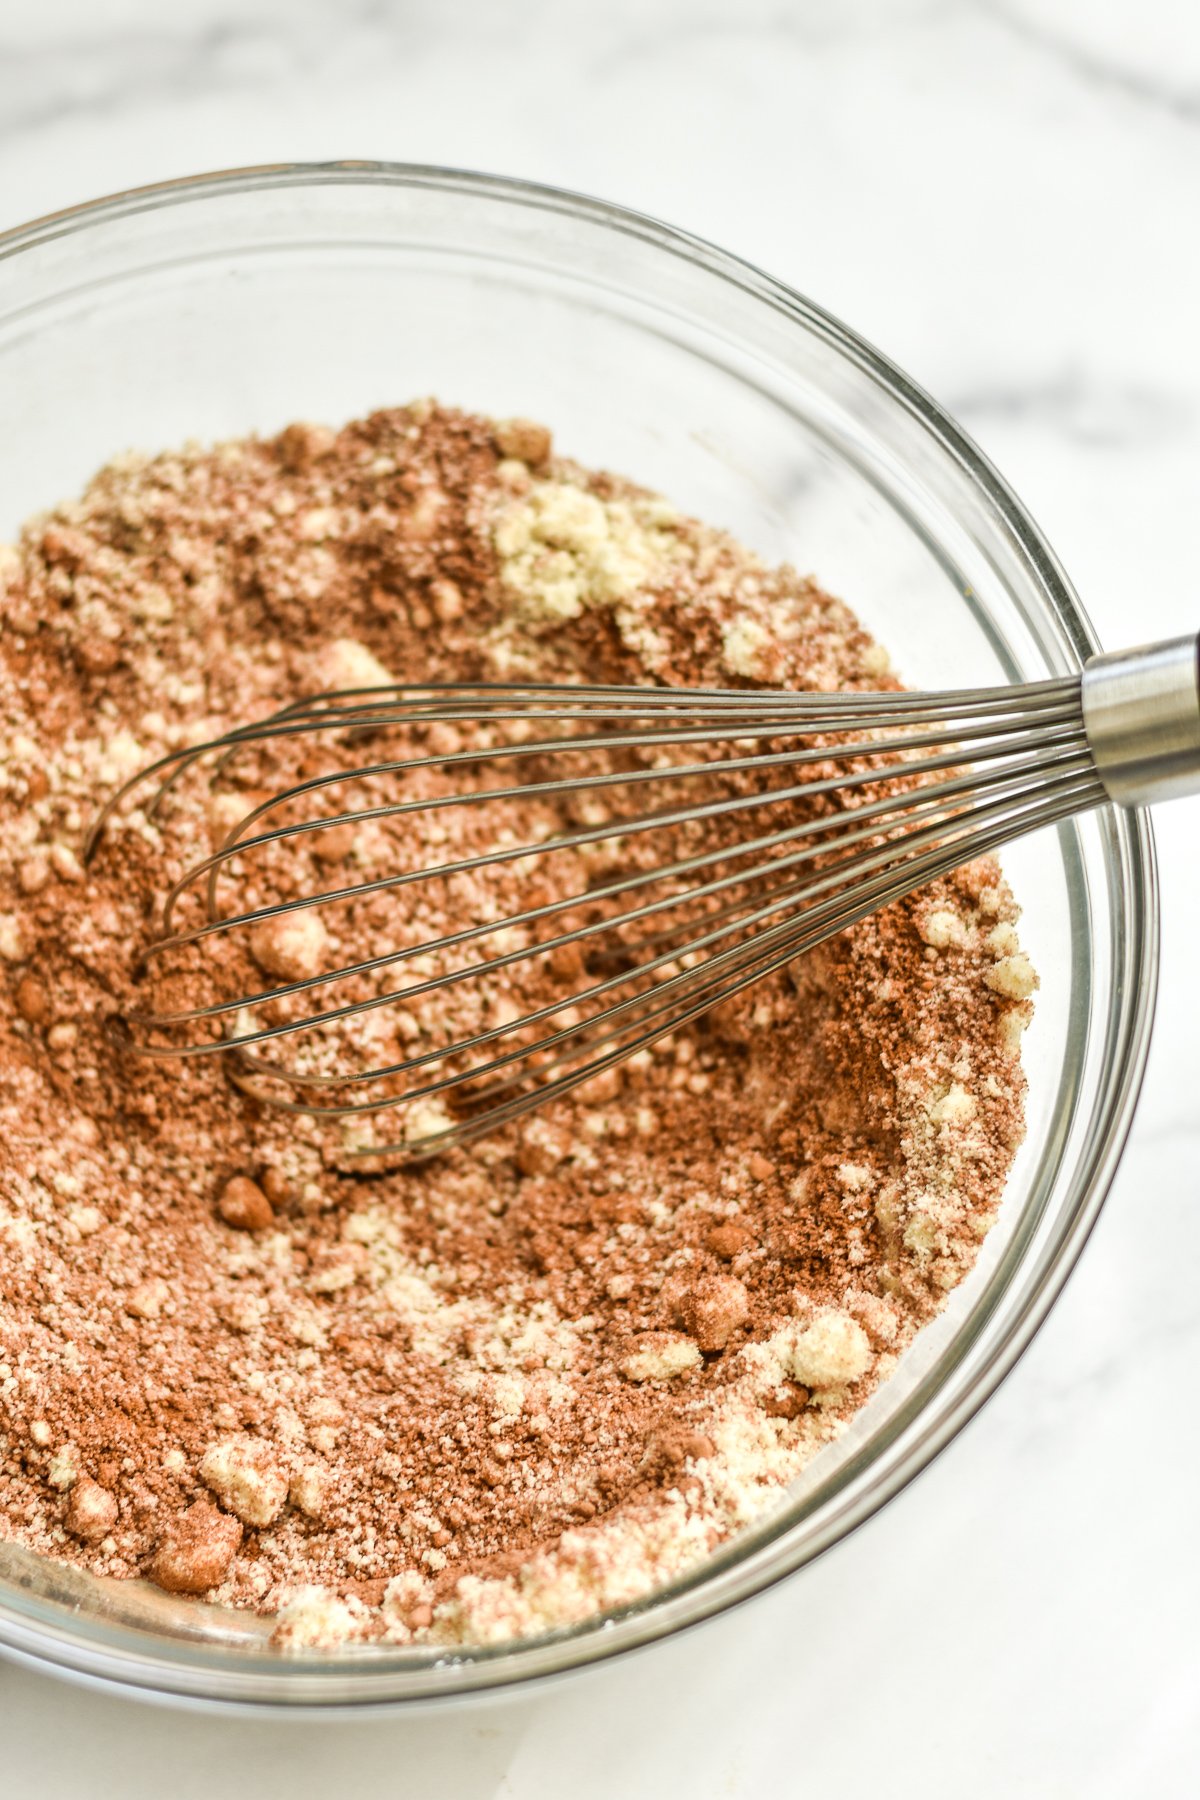 almond flour and dry ingredients whisked in a glass bowl